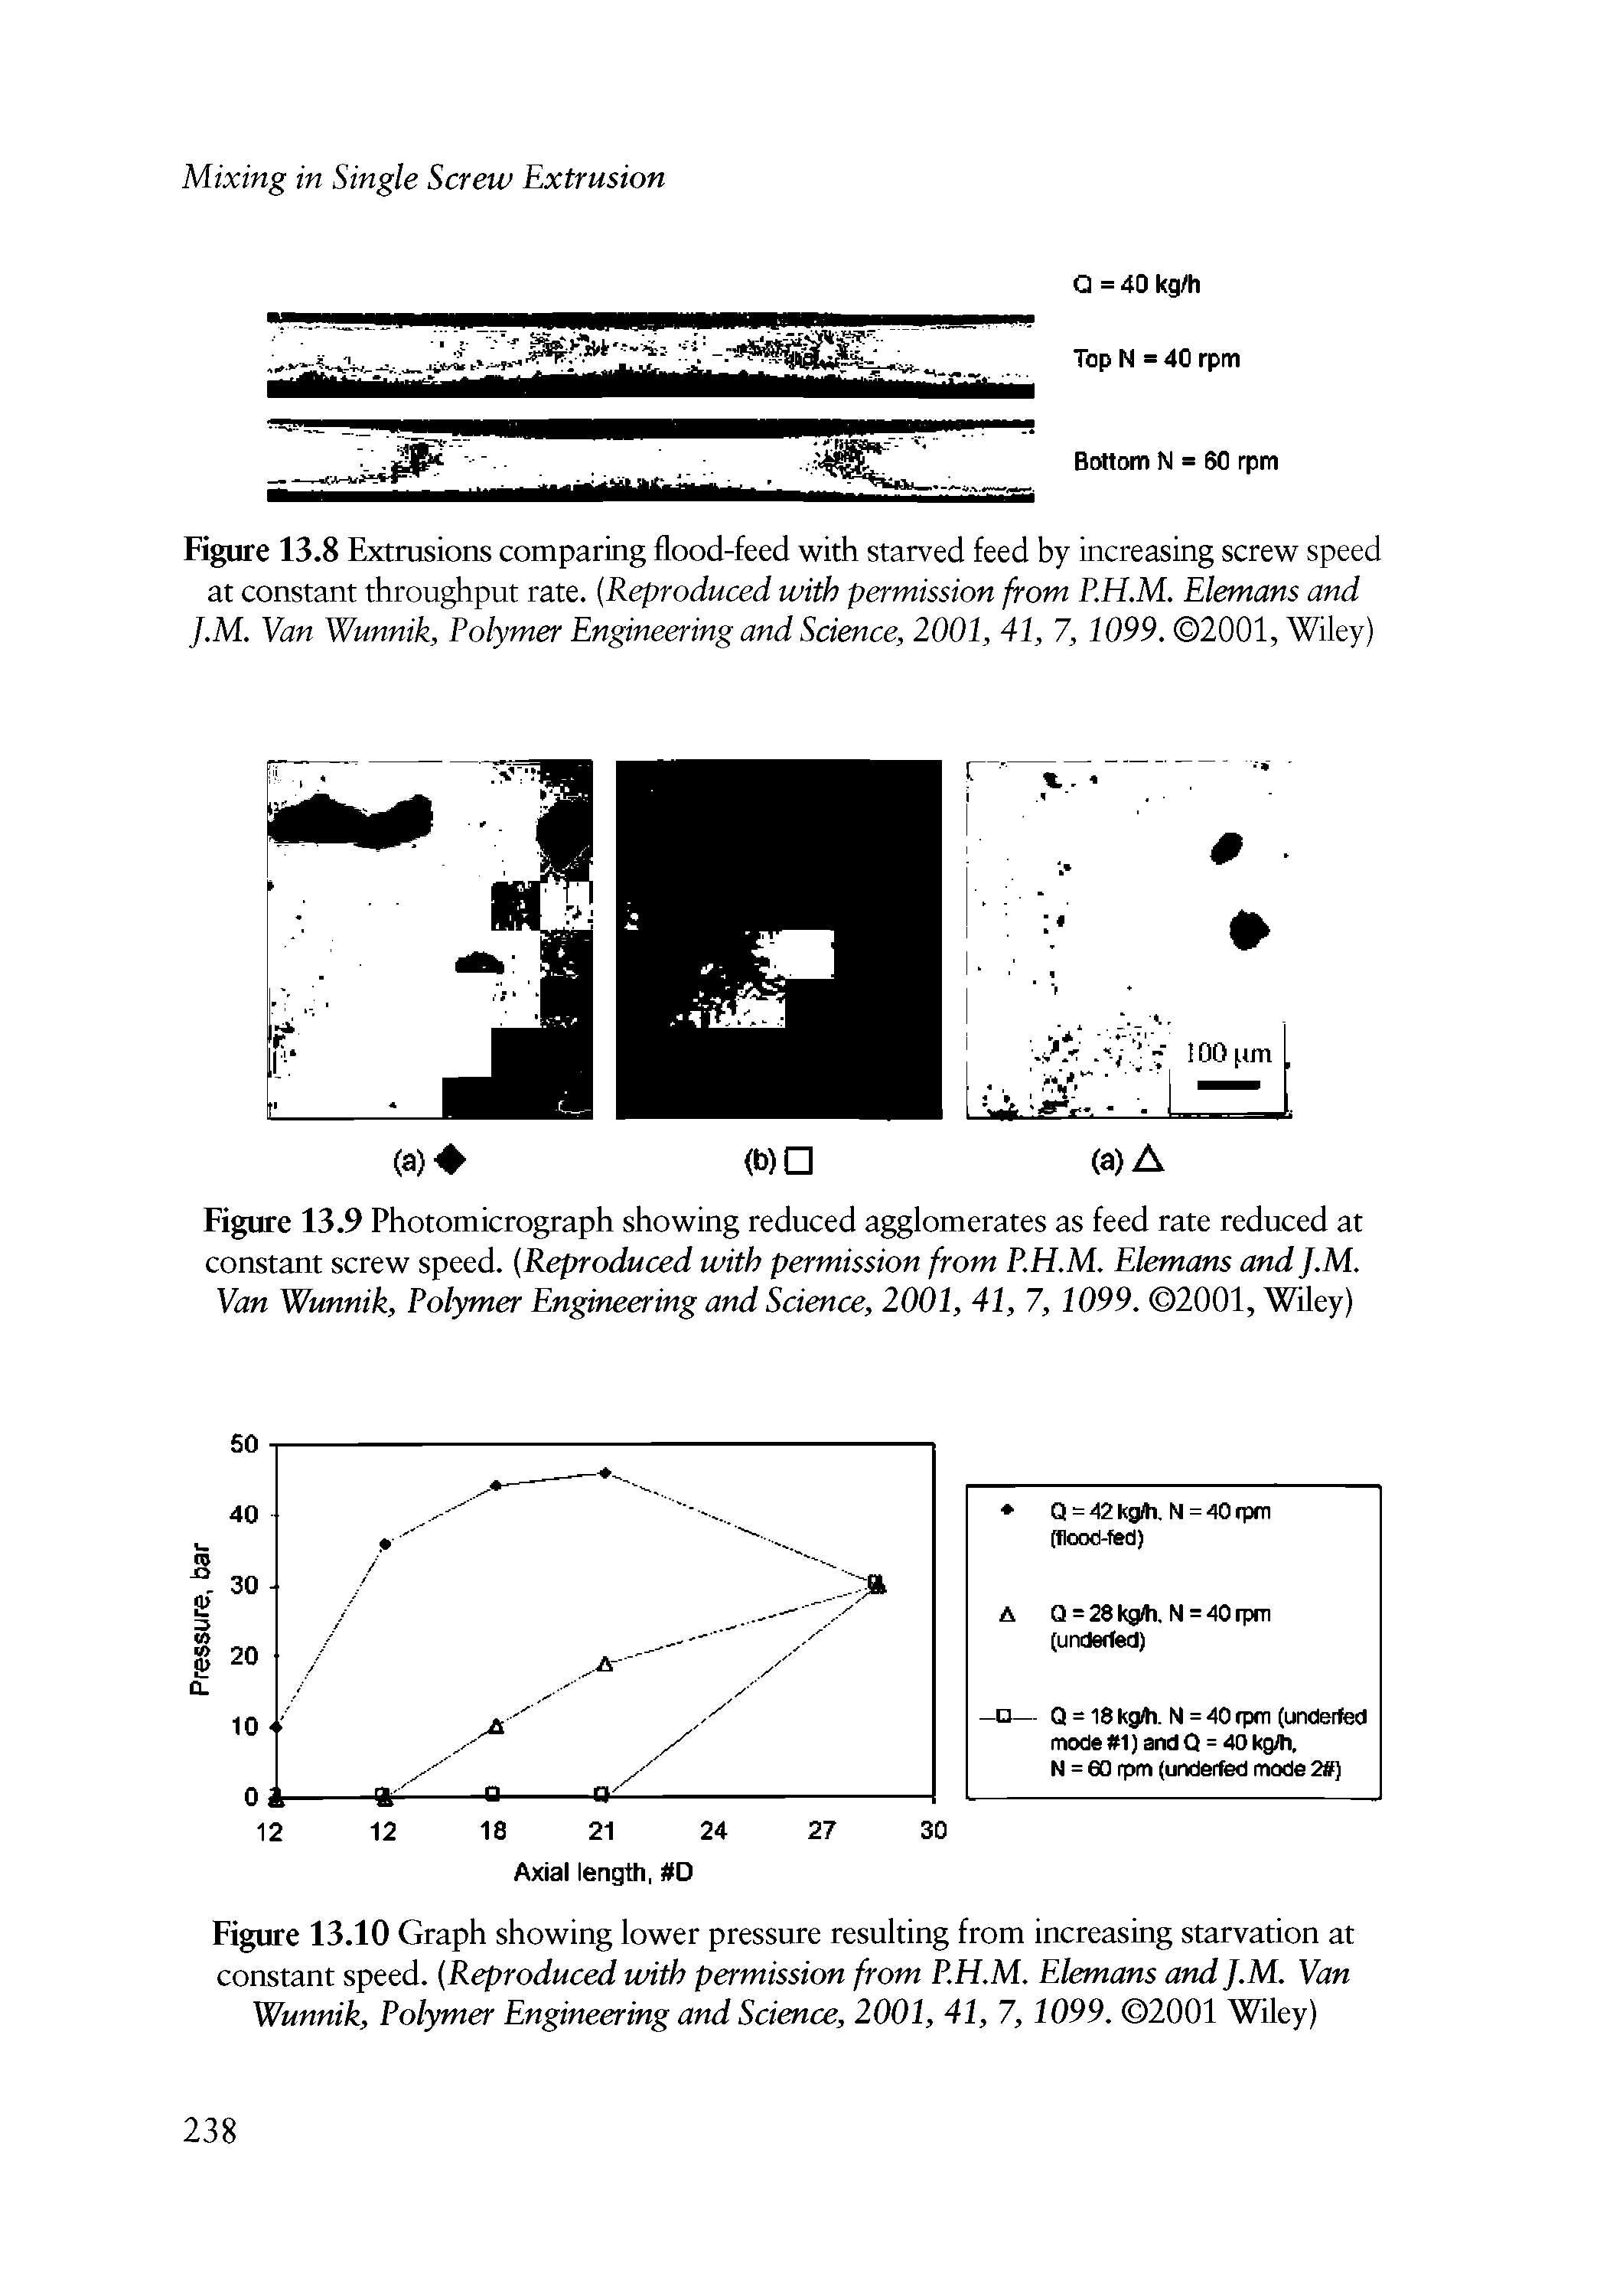 Figure 13.8 Extrusions comparing flood-feed with starved feed by increasing screw speed at constant throughput rate. Reproduced with permission from RH.M. Elemans and J.M. Van Wunnik, Polymer Engineering and Science, 2001, 41, 7, 1099. 2001, Wiley)...